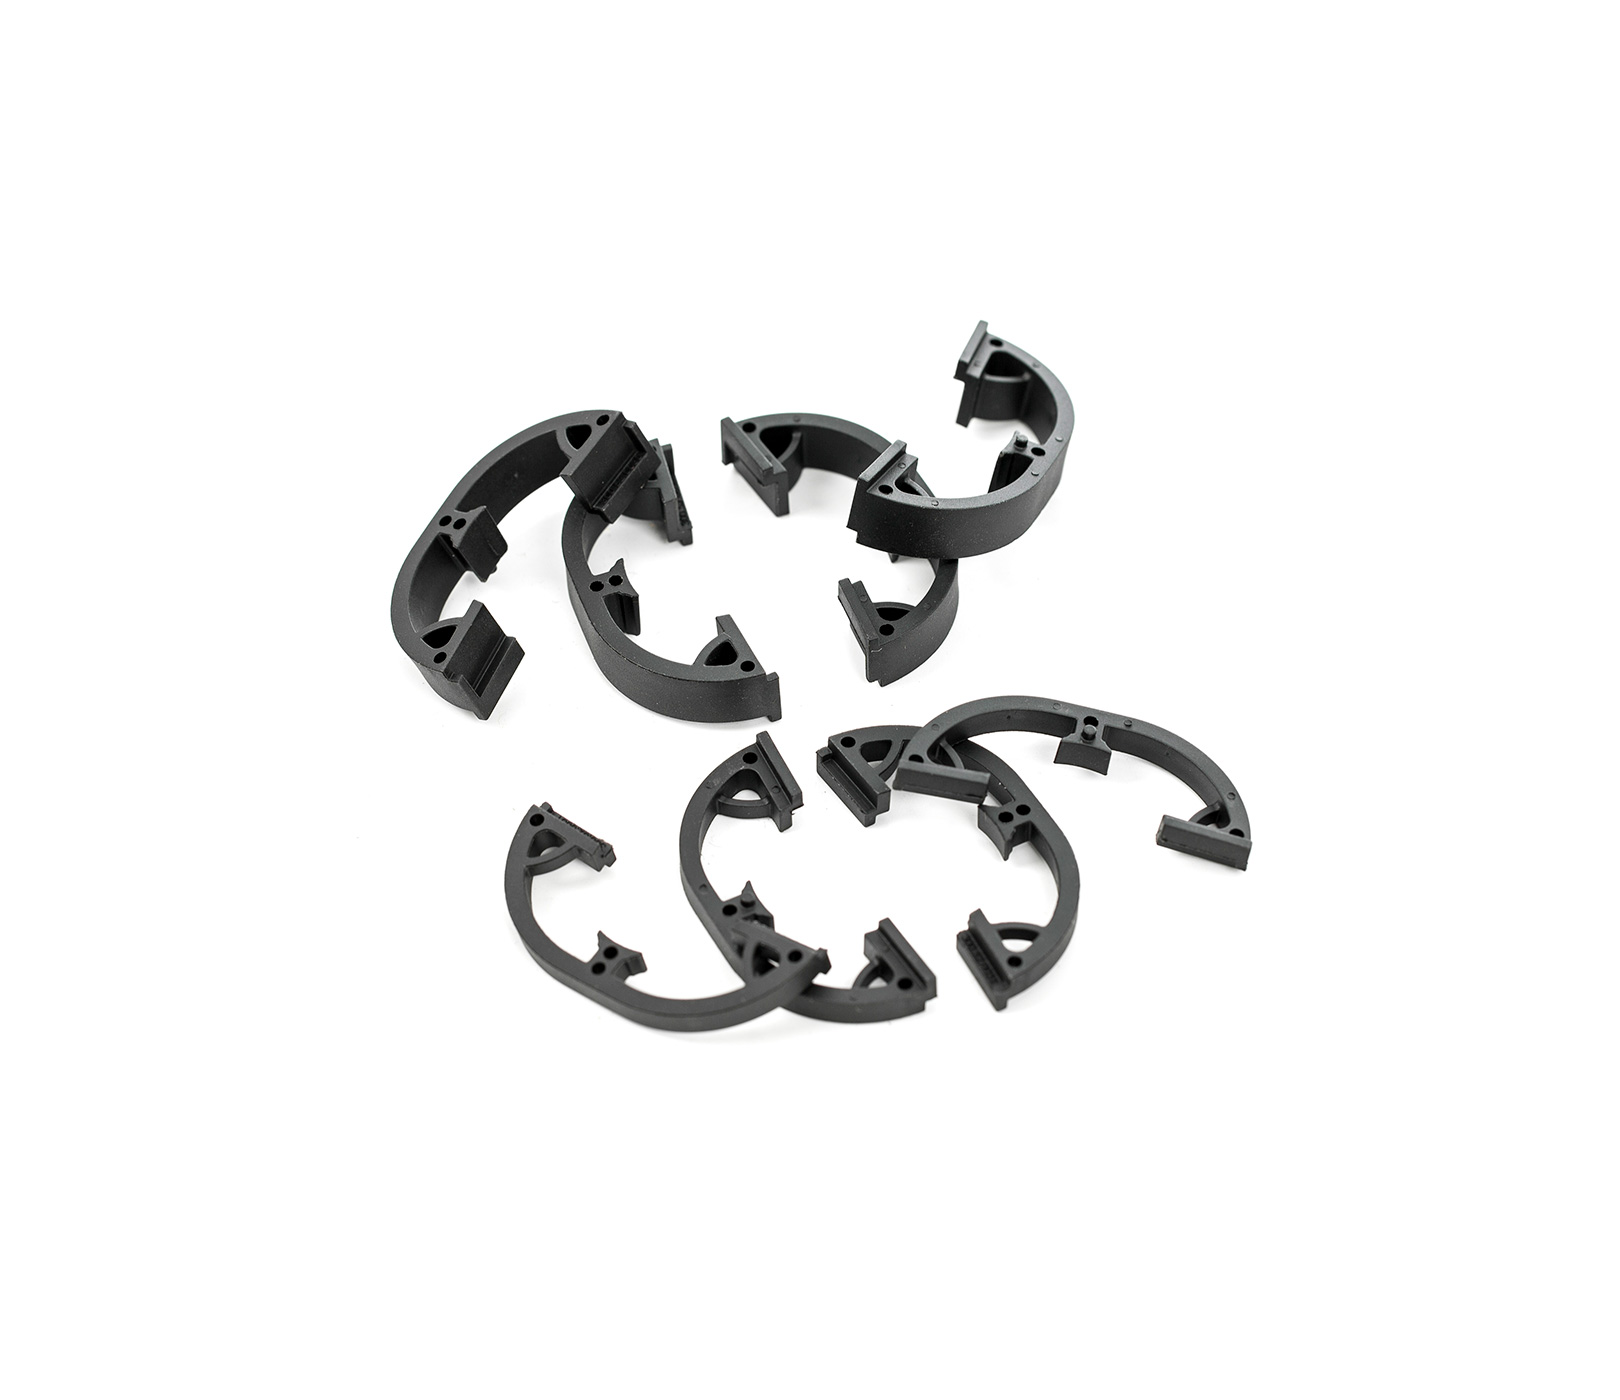 HEADSET SPACER KIT ICR OVAL